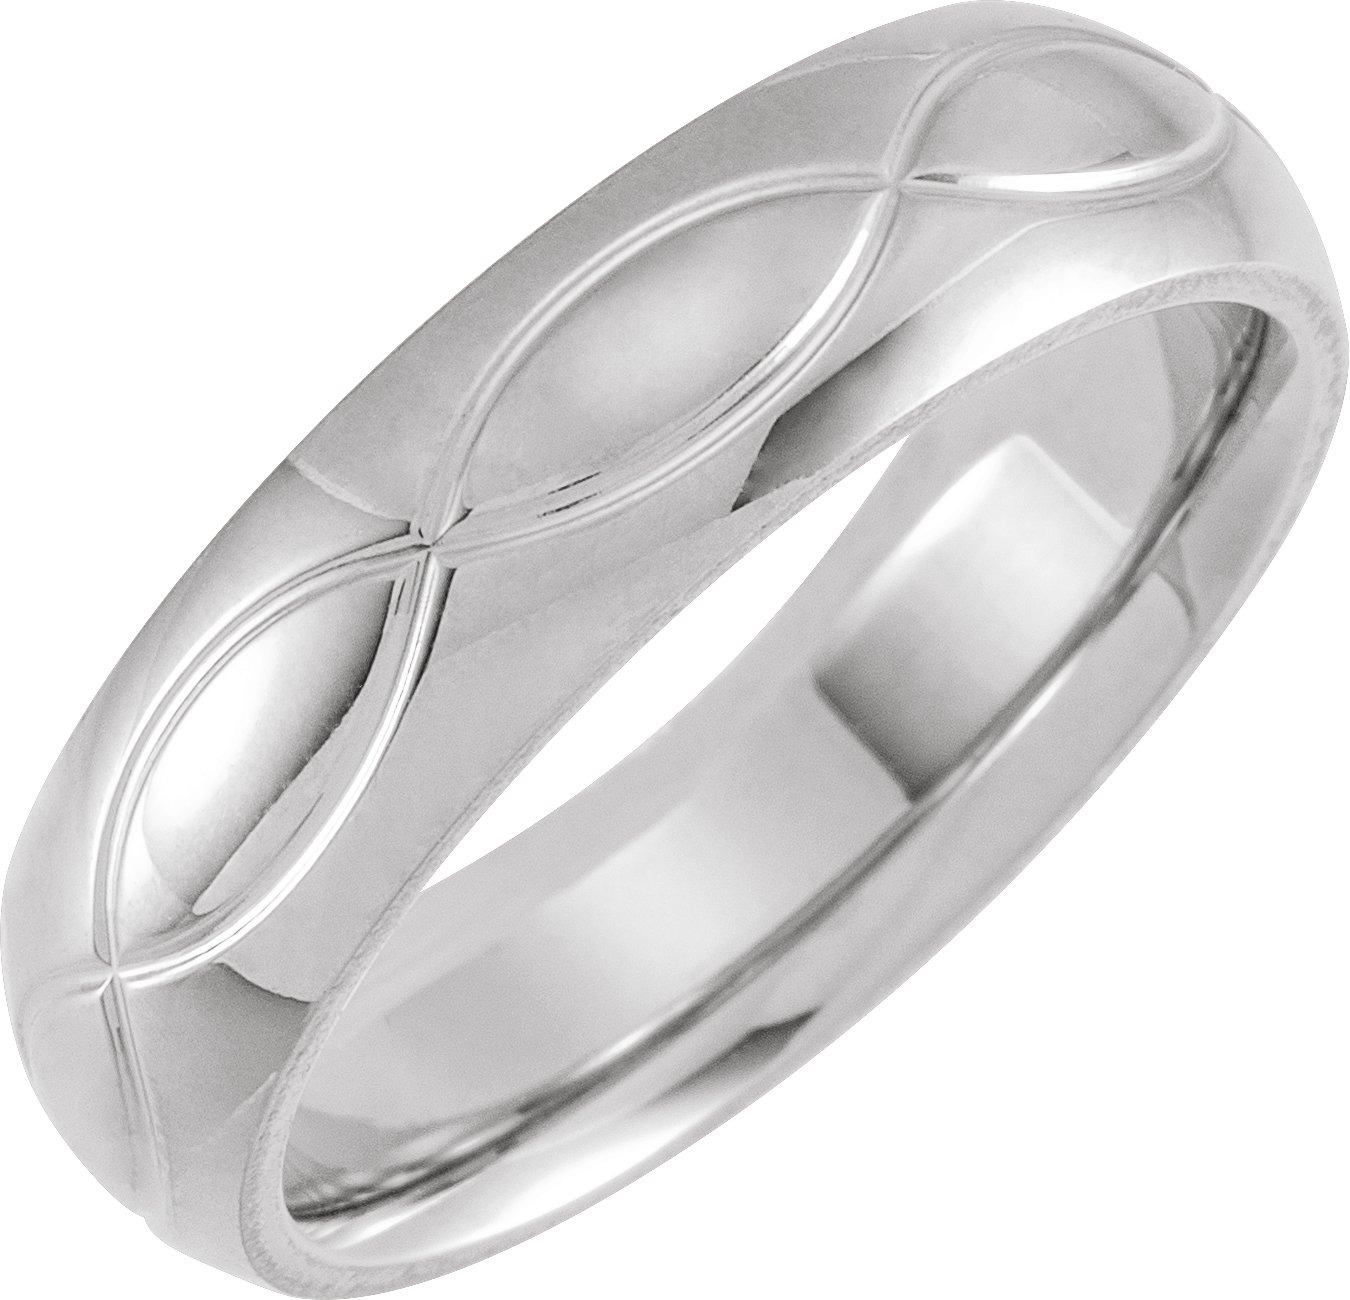 14K White 6 mm Infinity Patterned Band Size 11